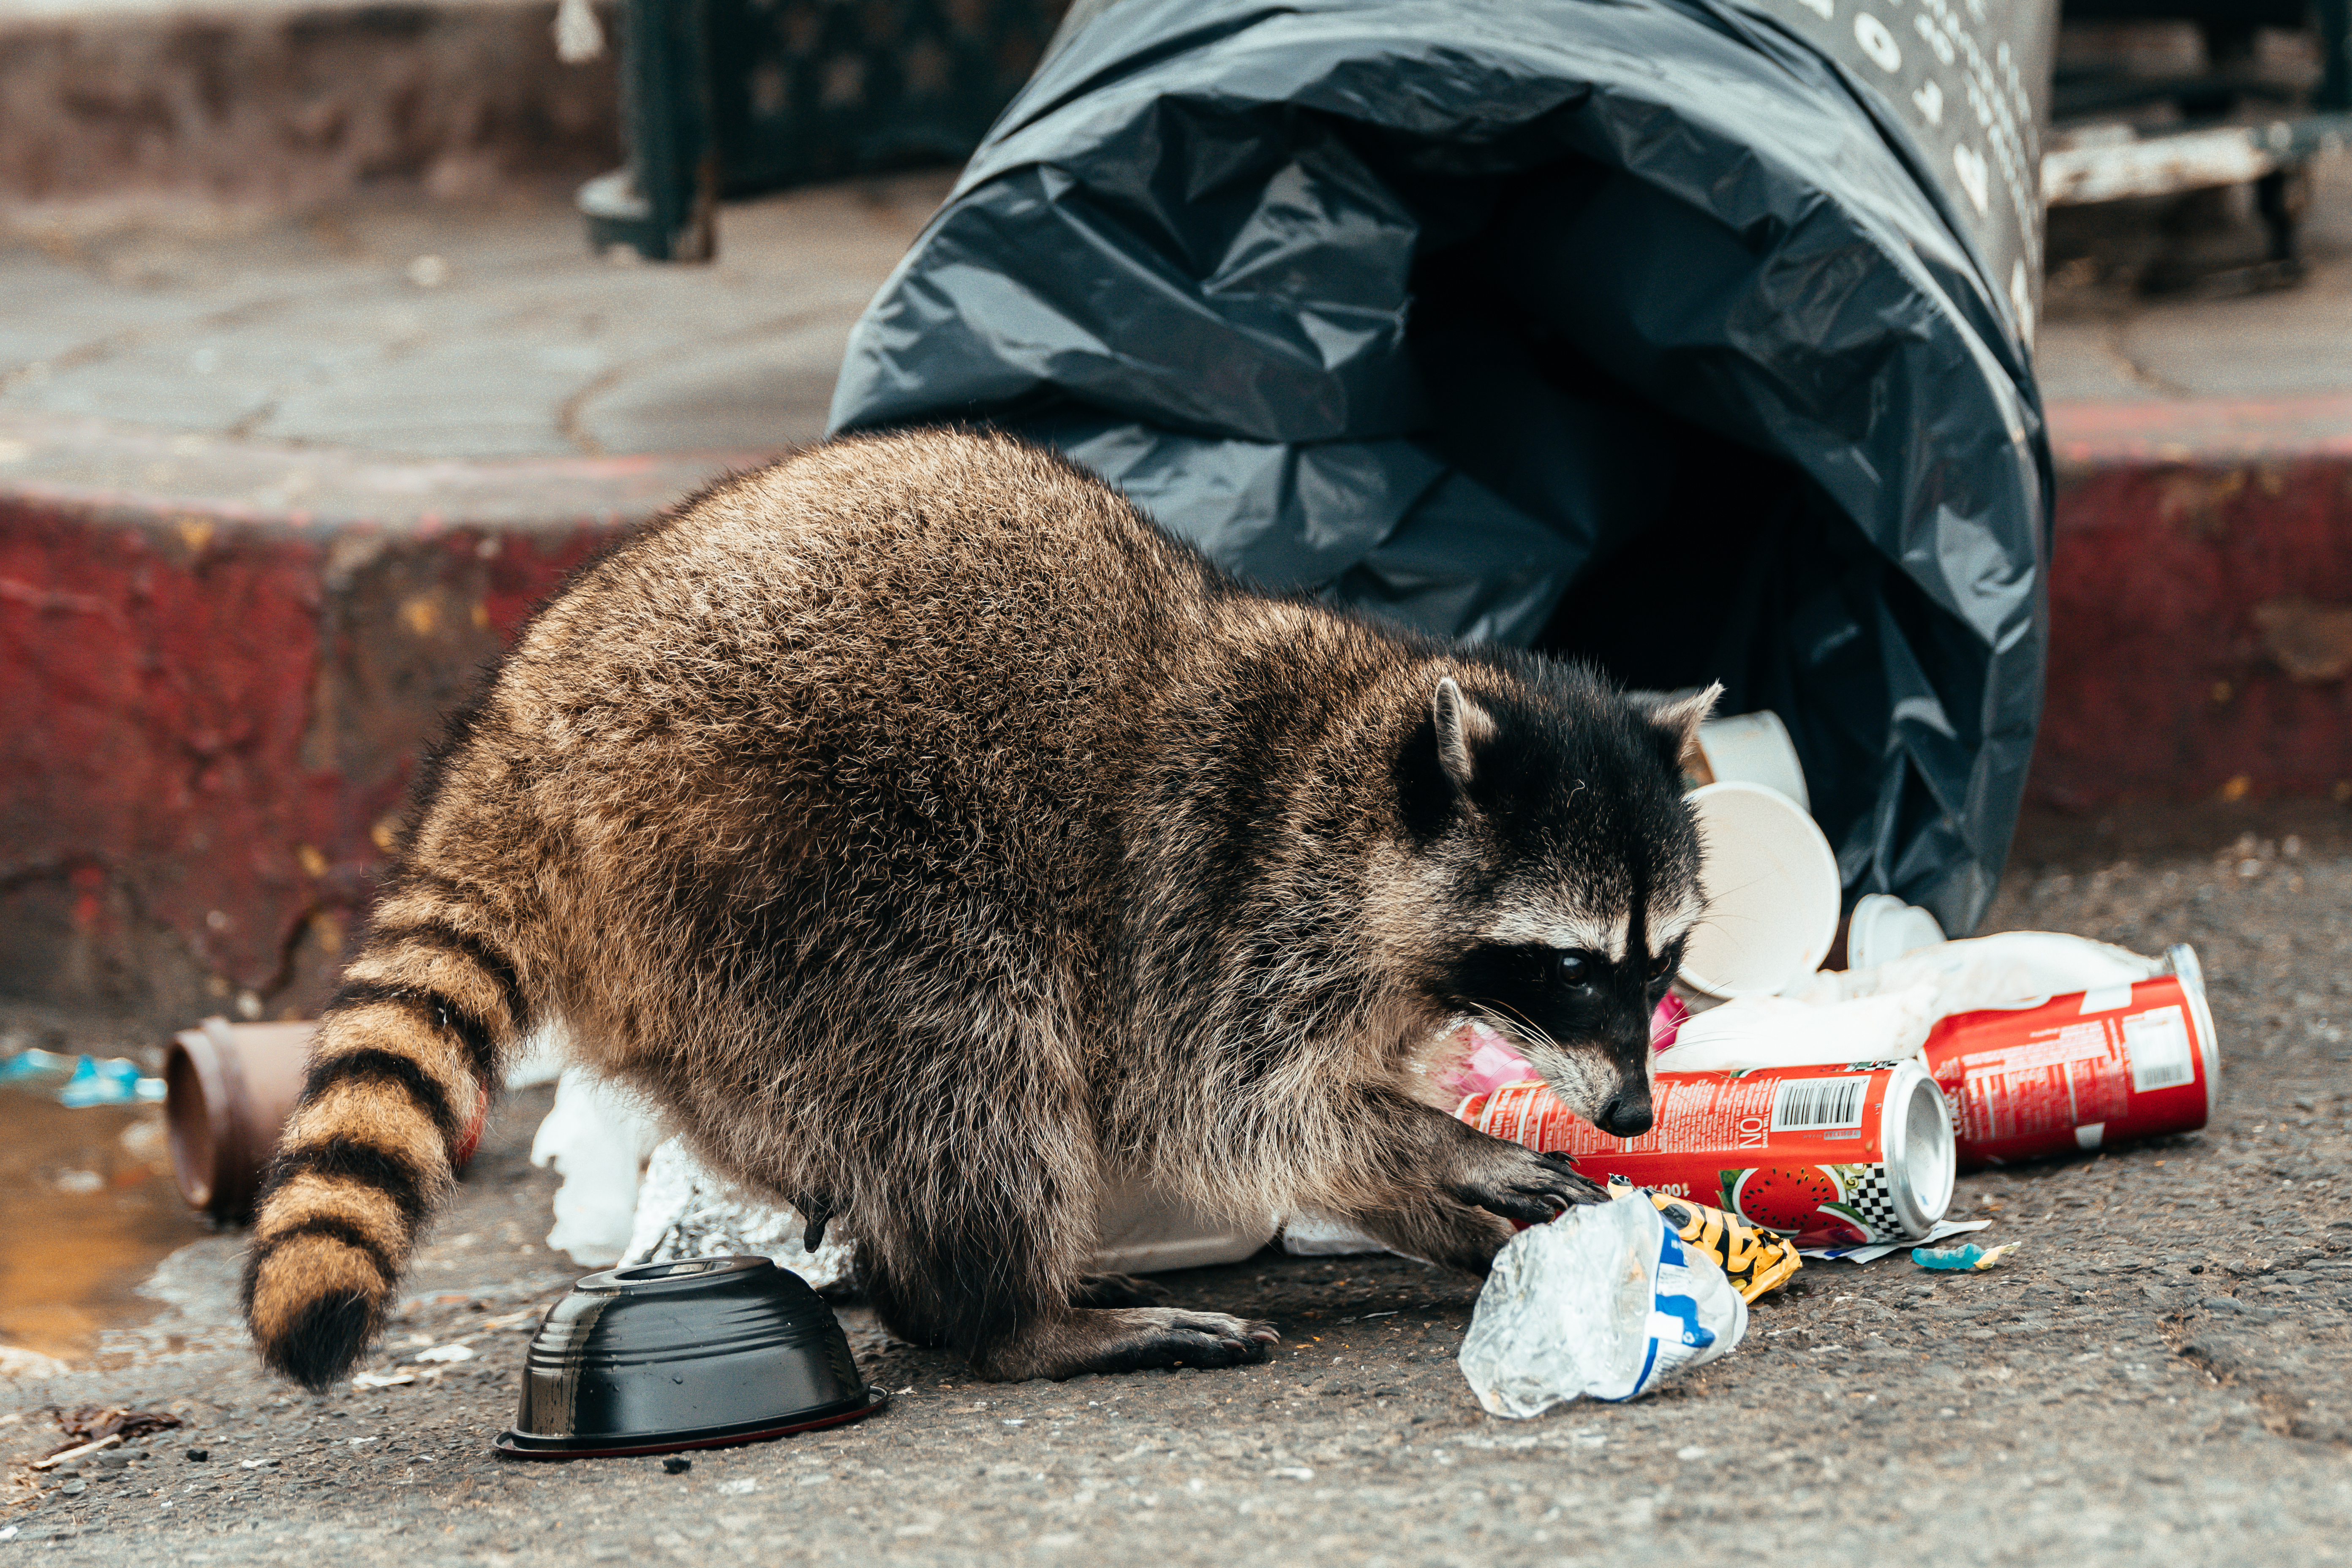 A raccoon rummaging in a trash can - if you are in need of residential wildlife control in Utah County, UT this fall, contact Thorn.